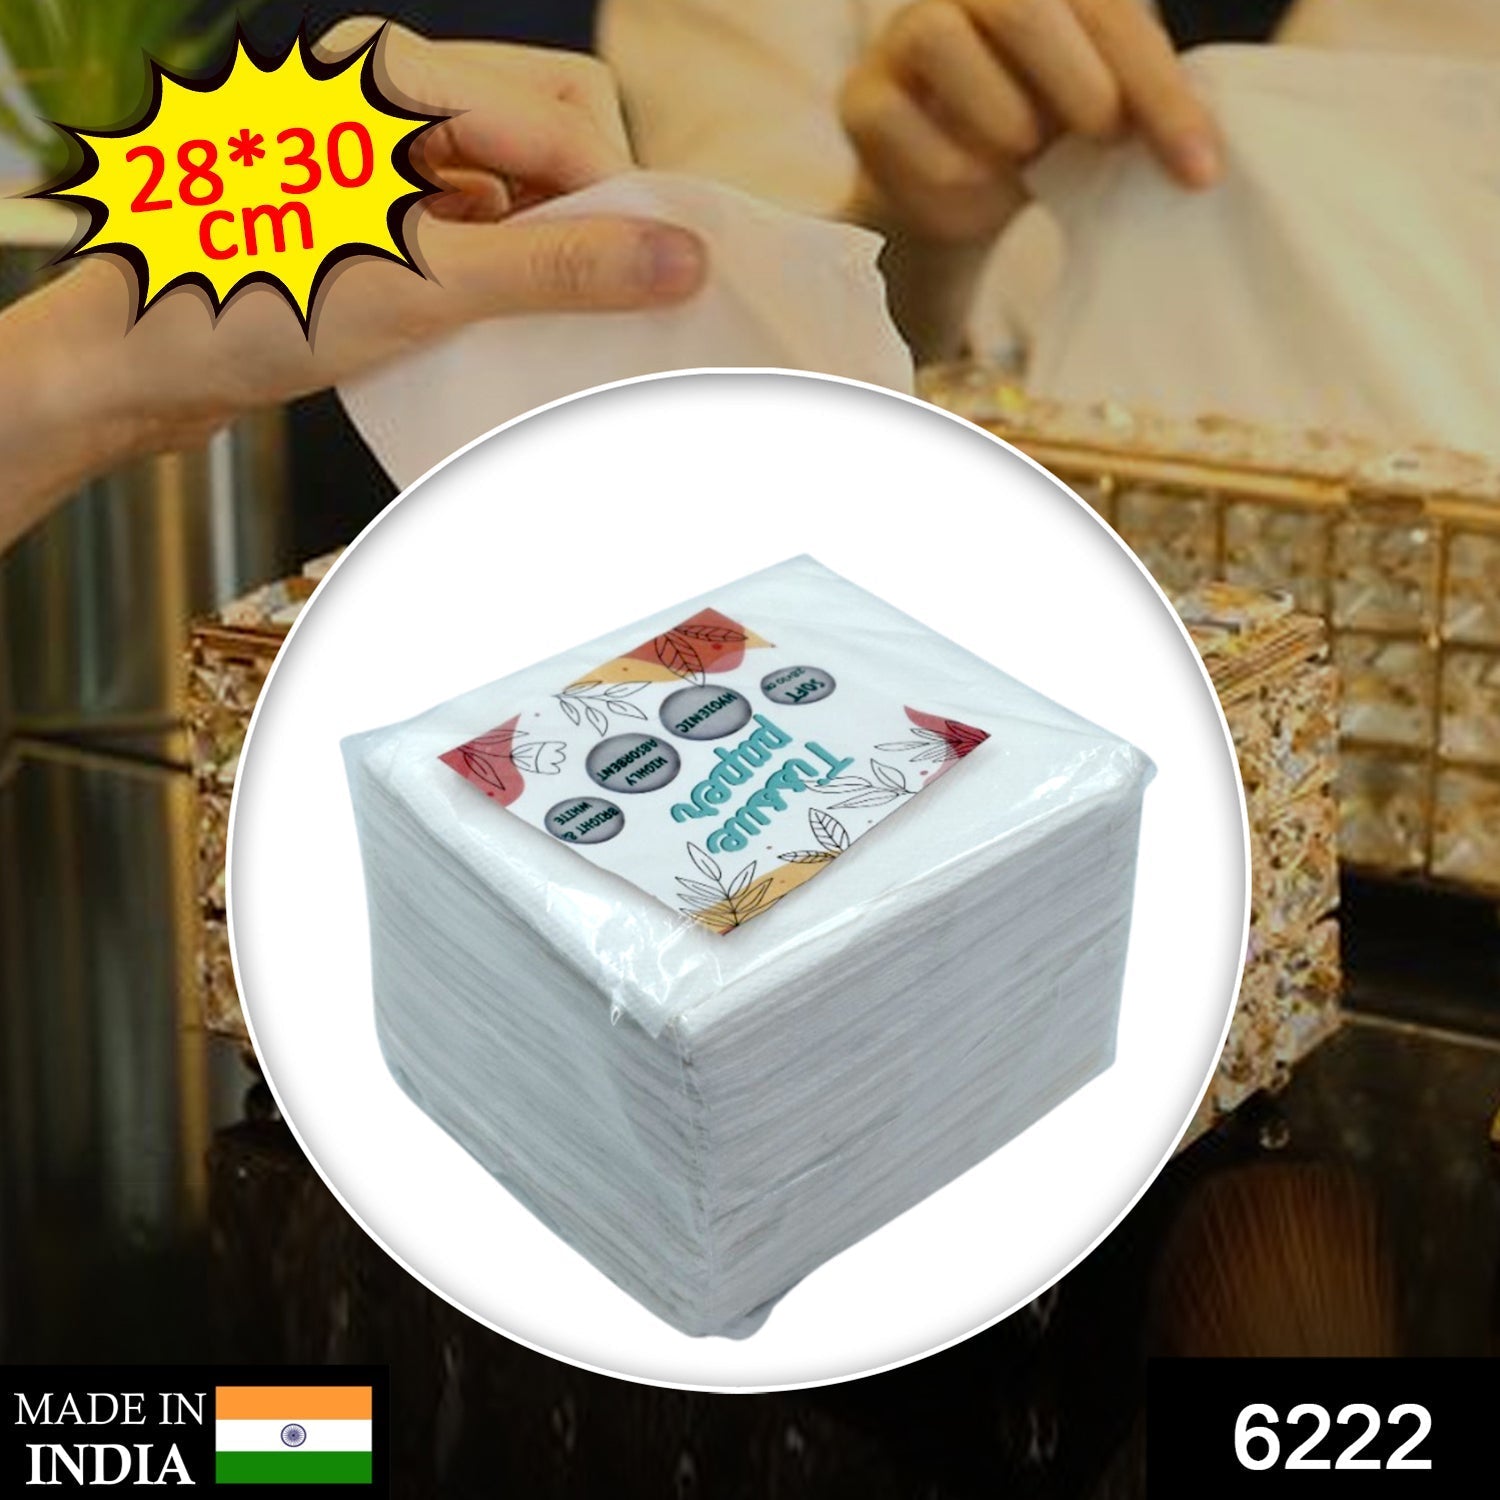 6222 Tissue Paper For Wiping And Cleaning Purposes Of Types Of Things. DeoDap